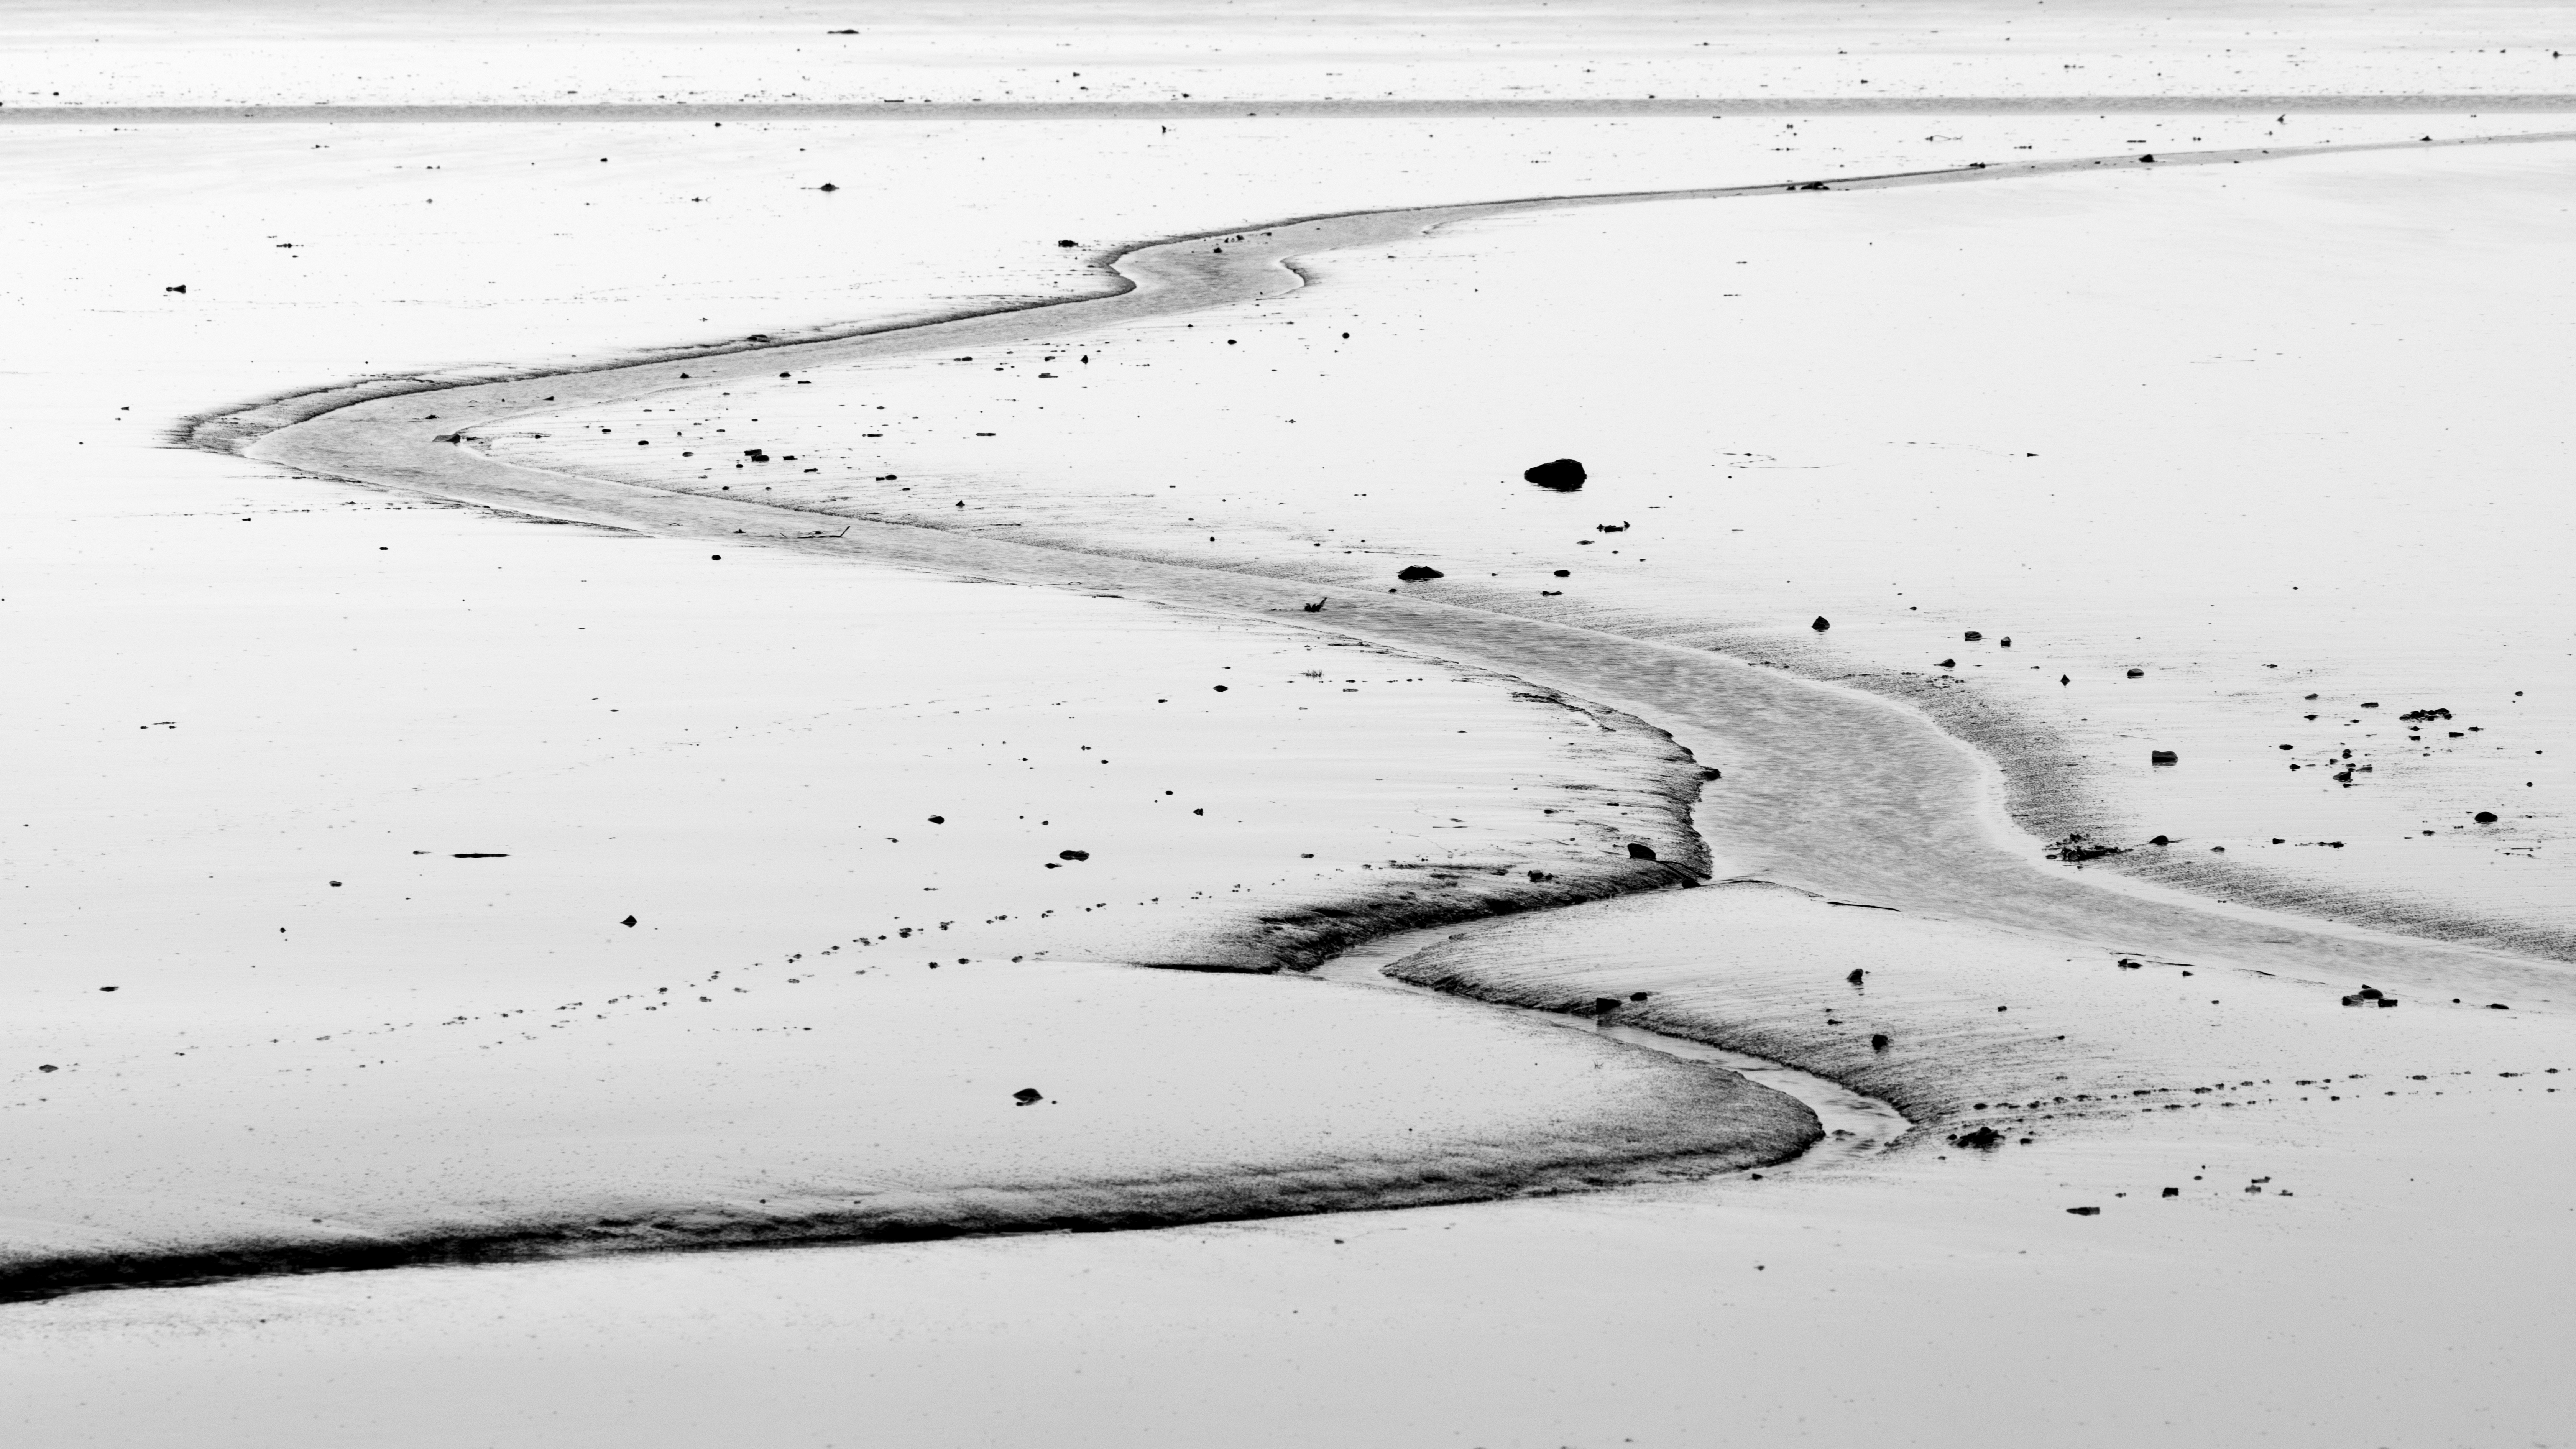 A stretch of muddy land left uncovered at low tide. stretch of muddy land left uncovered at low tide along the coast of Iceland.